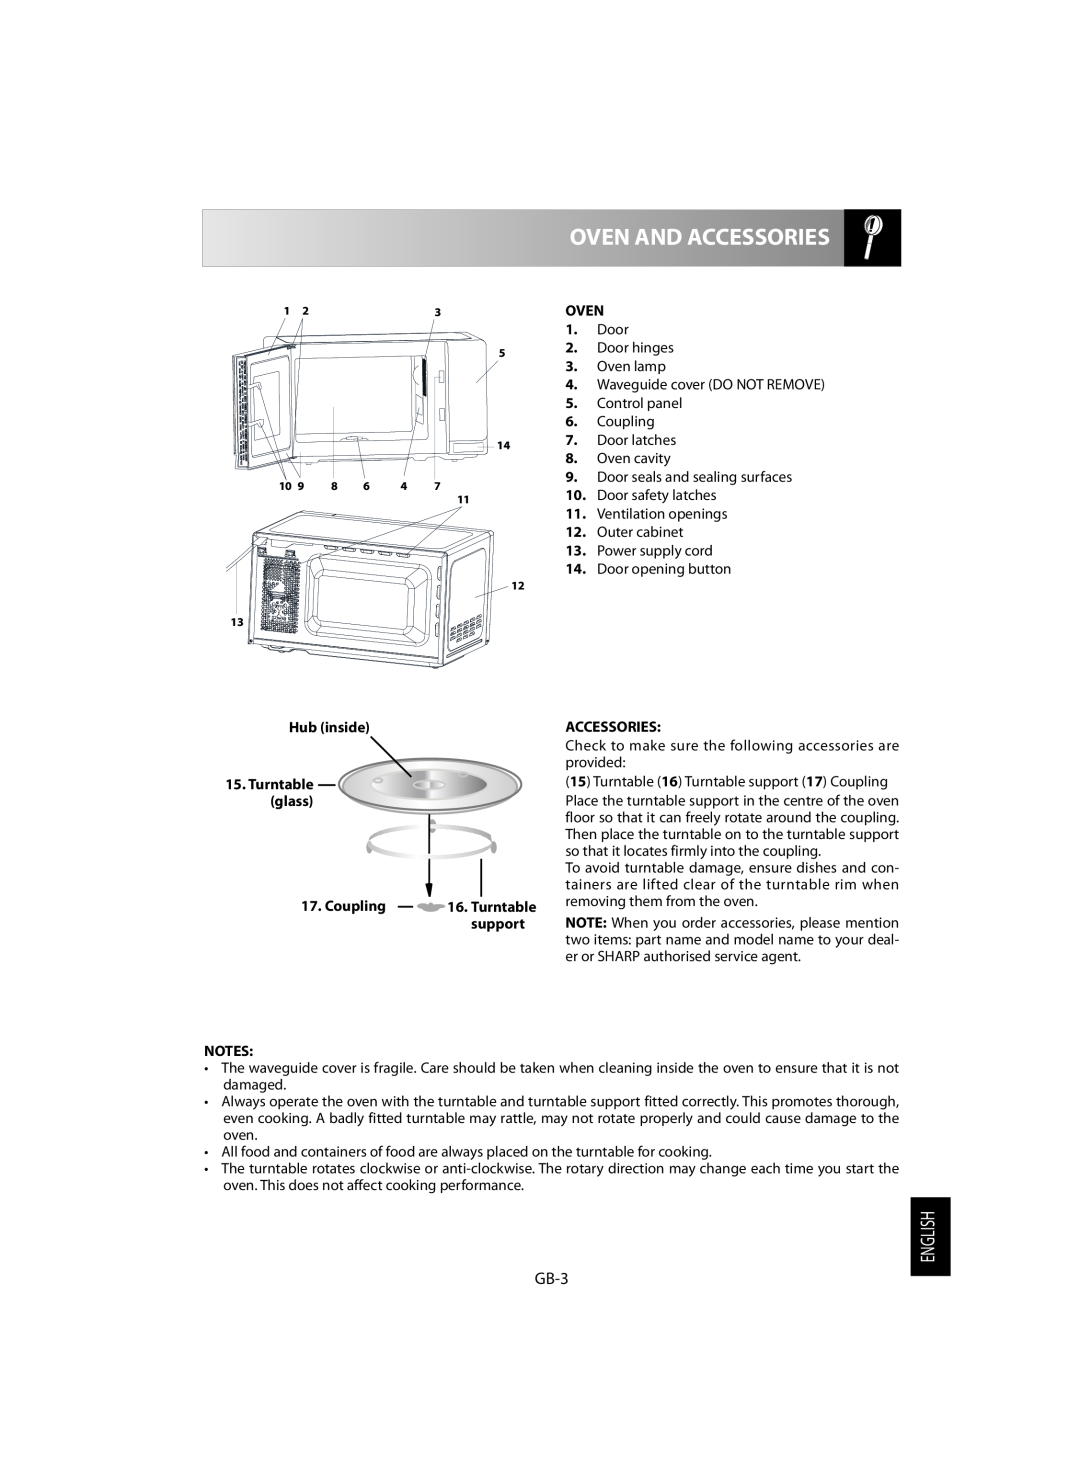 Sharp R-242, R-342 operation manual Oven And Accessories, GB-3 